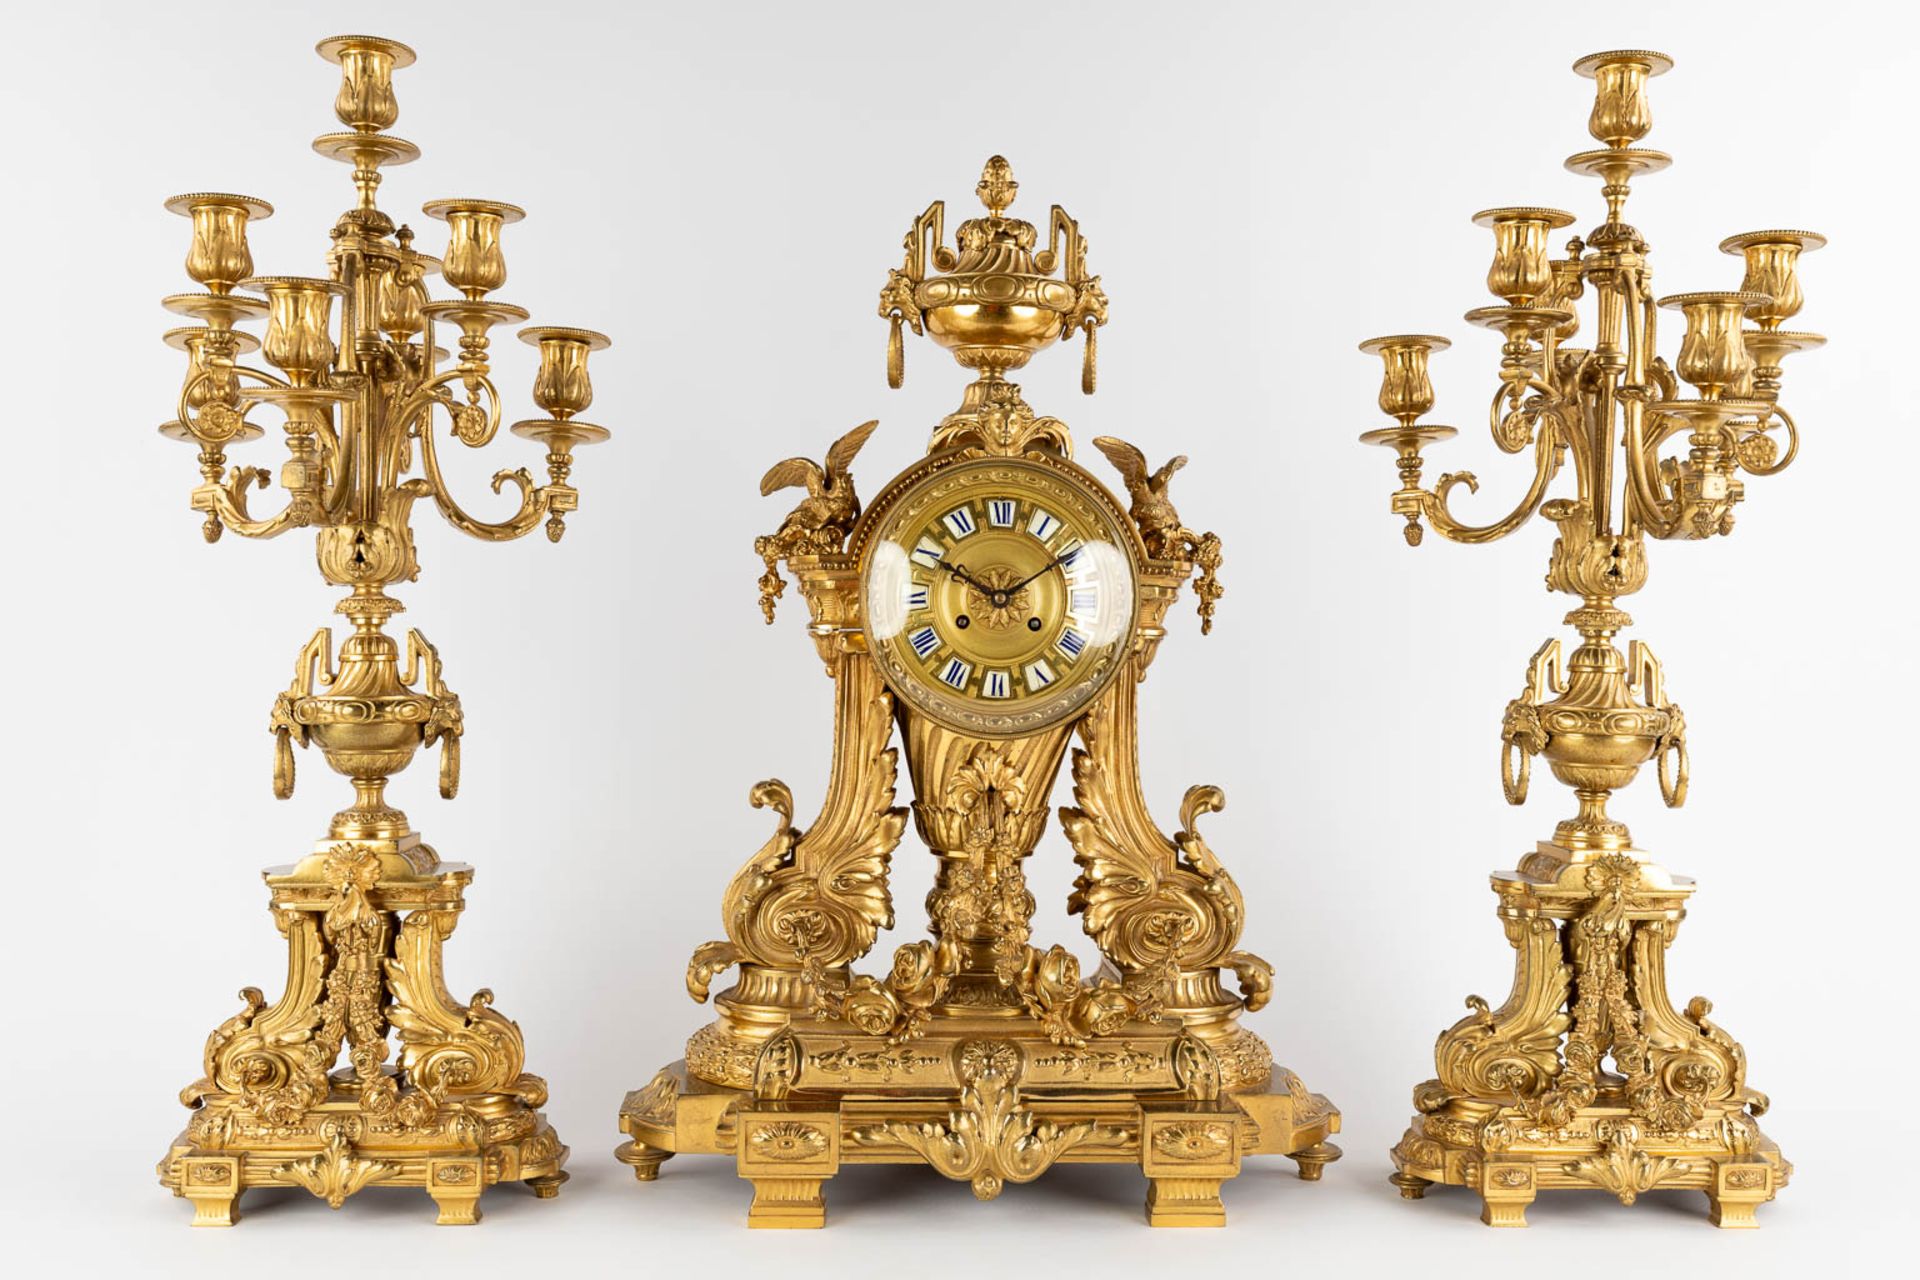 A three-piece mantle garniture clock and candelabra, gilt bronze in a Louis XVI style, 19th C. (D:19 - Image 3 of 19